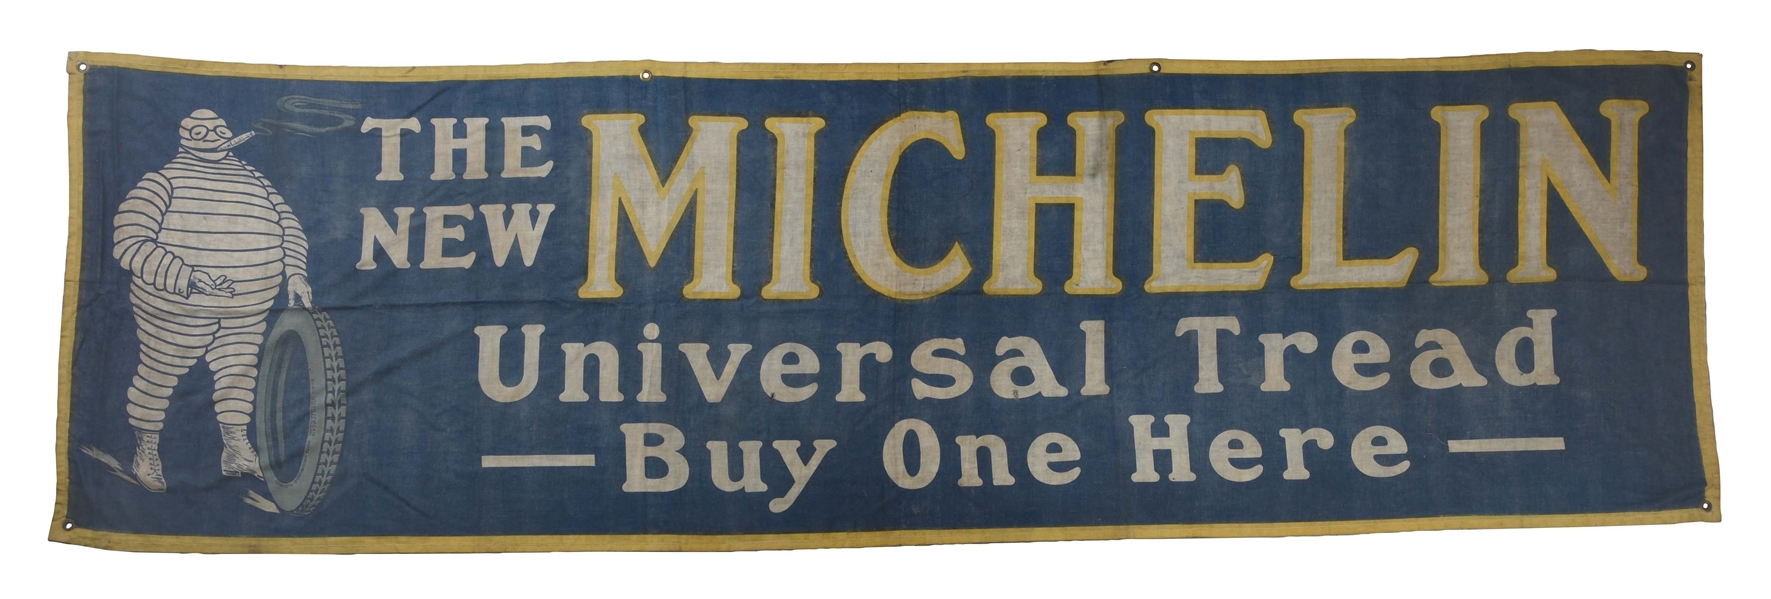 MICHELIN THE UNIVERSAL TREAD CLOTH BANNER WITH EARLY BIBENDUM GRAPHIC.